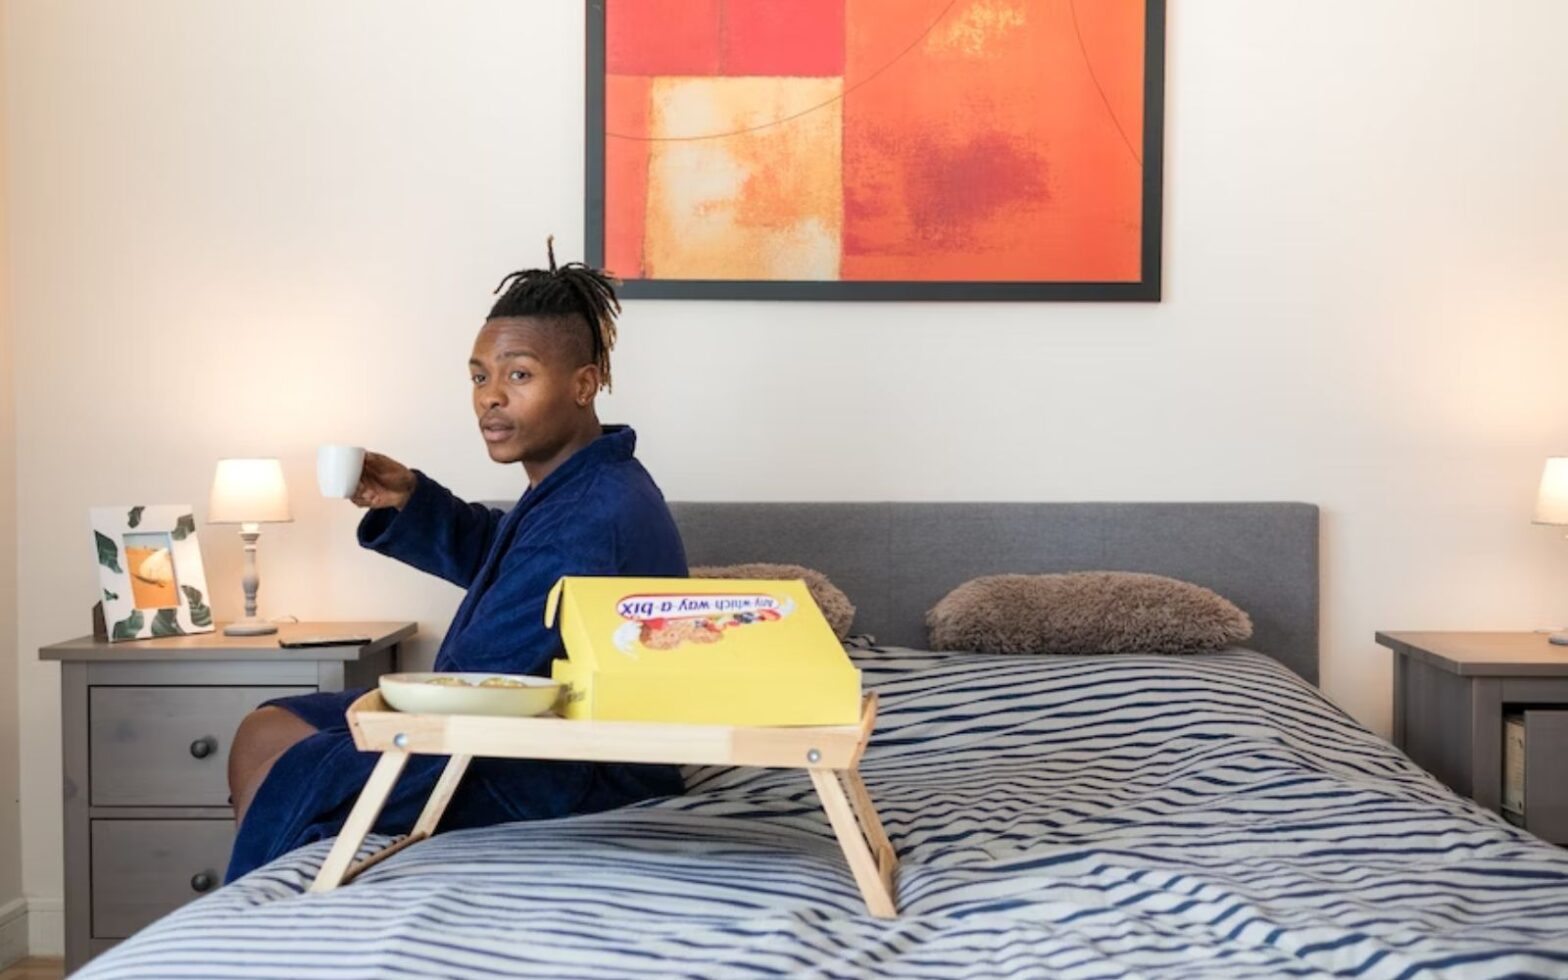 Black-Owned Bed And Breakfasts Across The U.S.